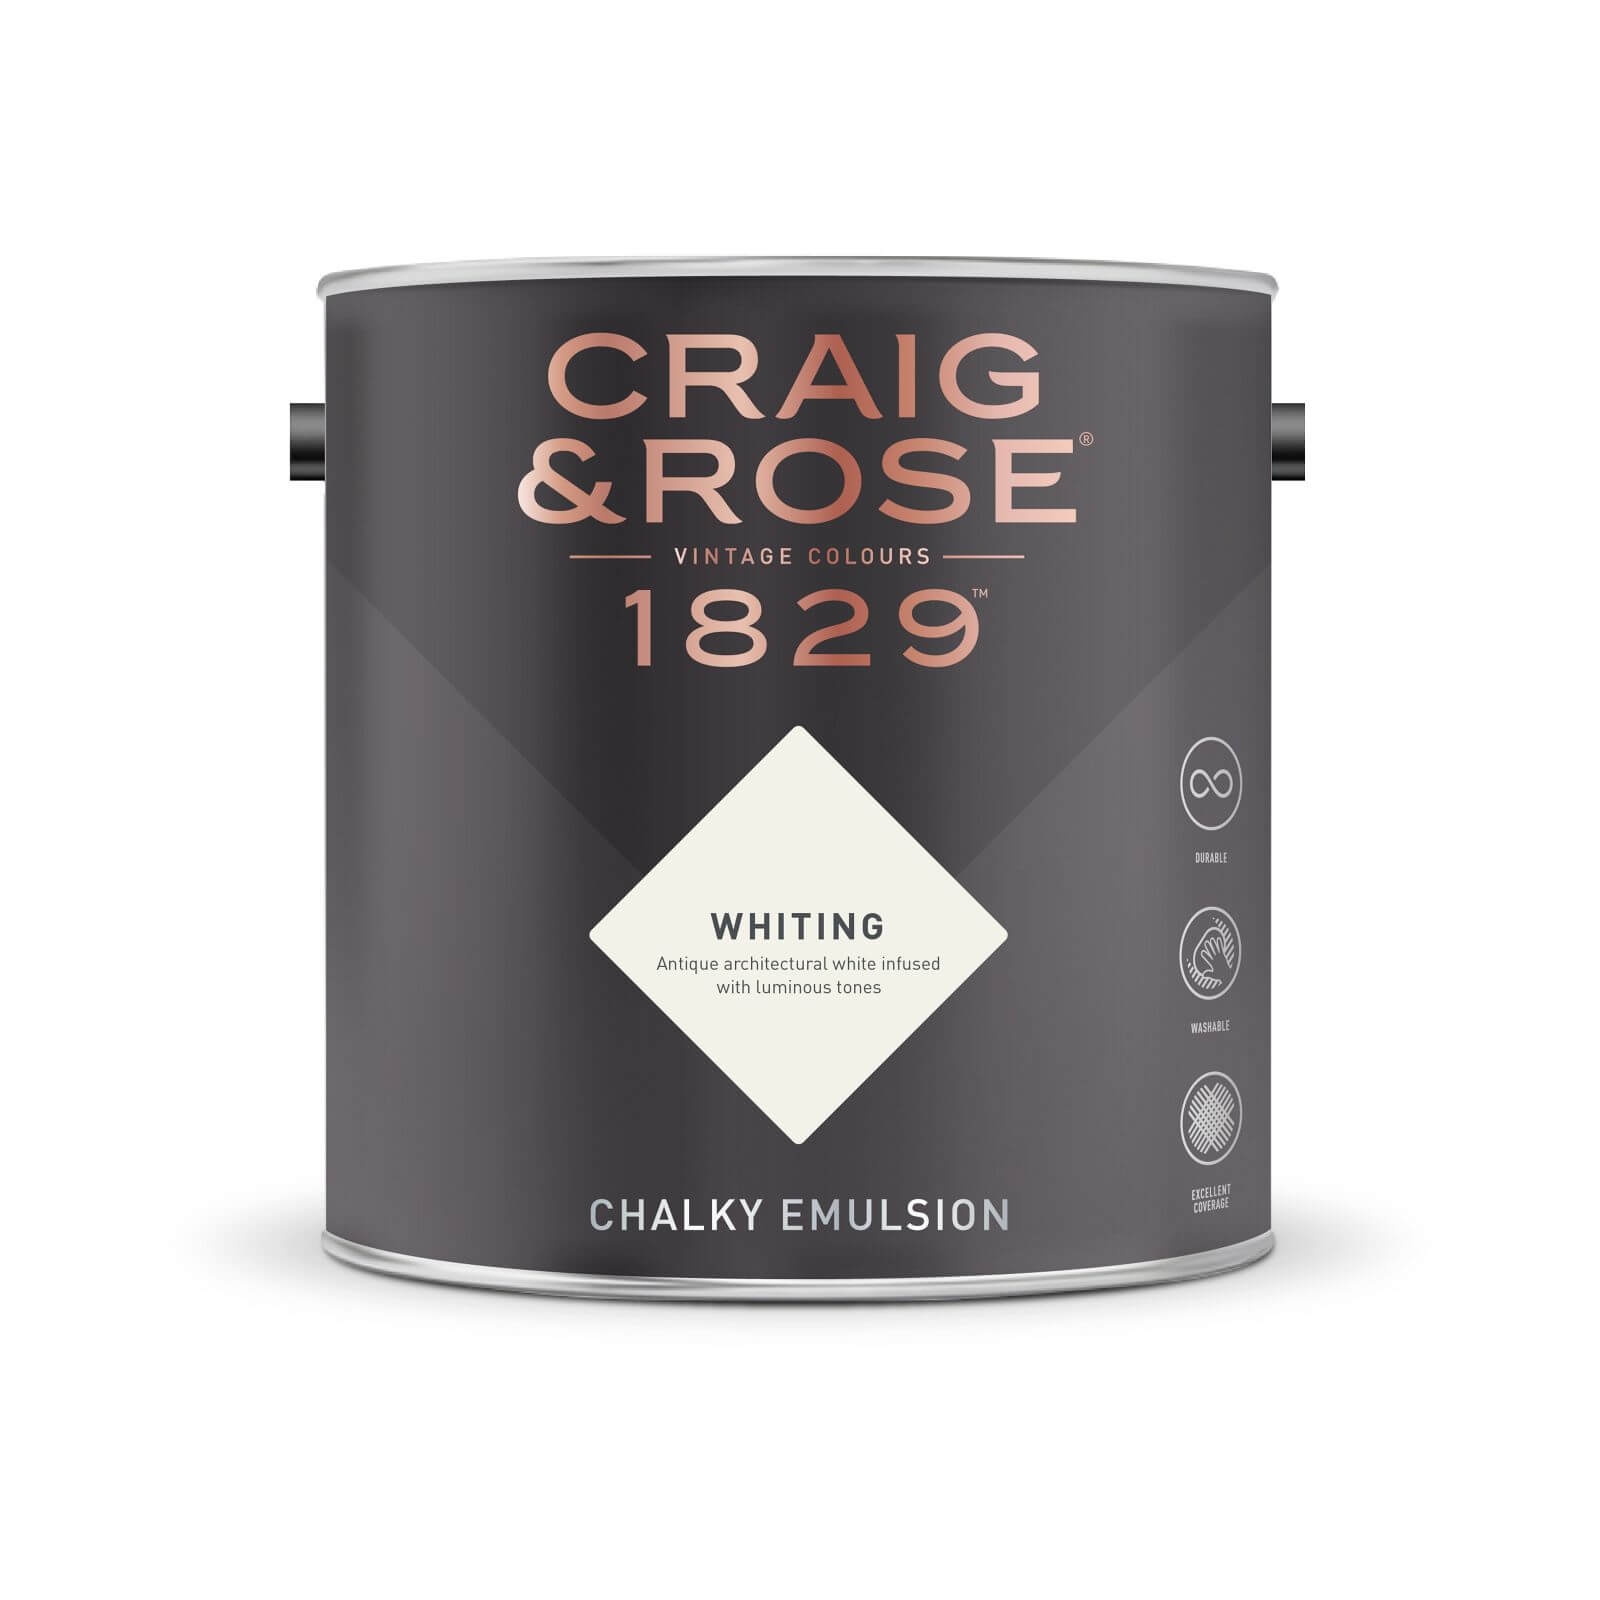 Craig & Rose 1829 Chalky Emulsion Paint Whiting - Tester 50ml